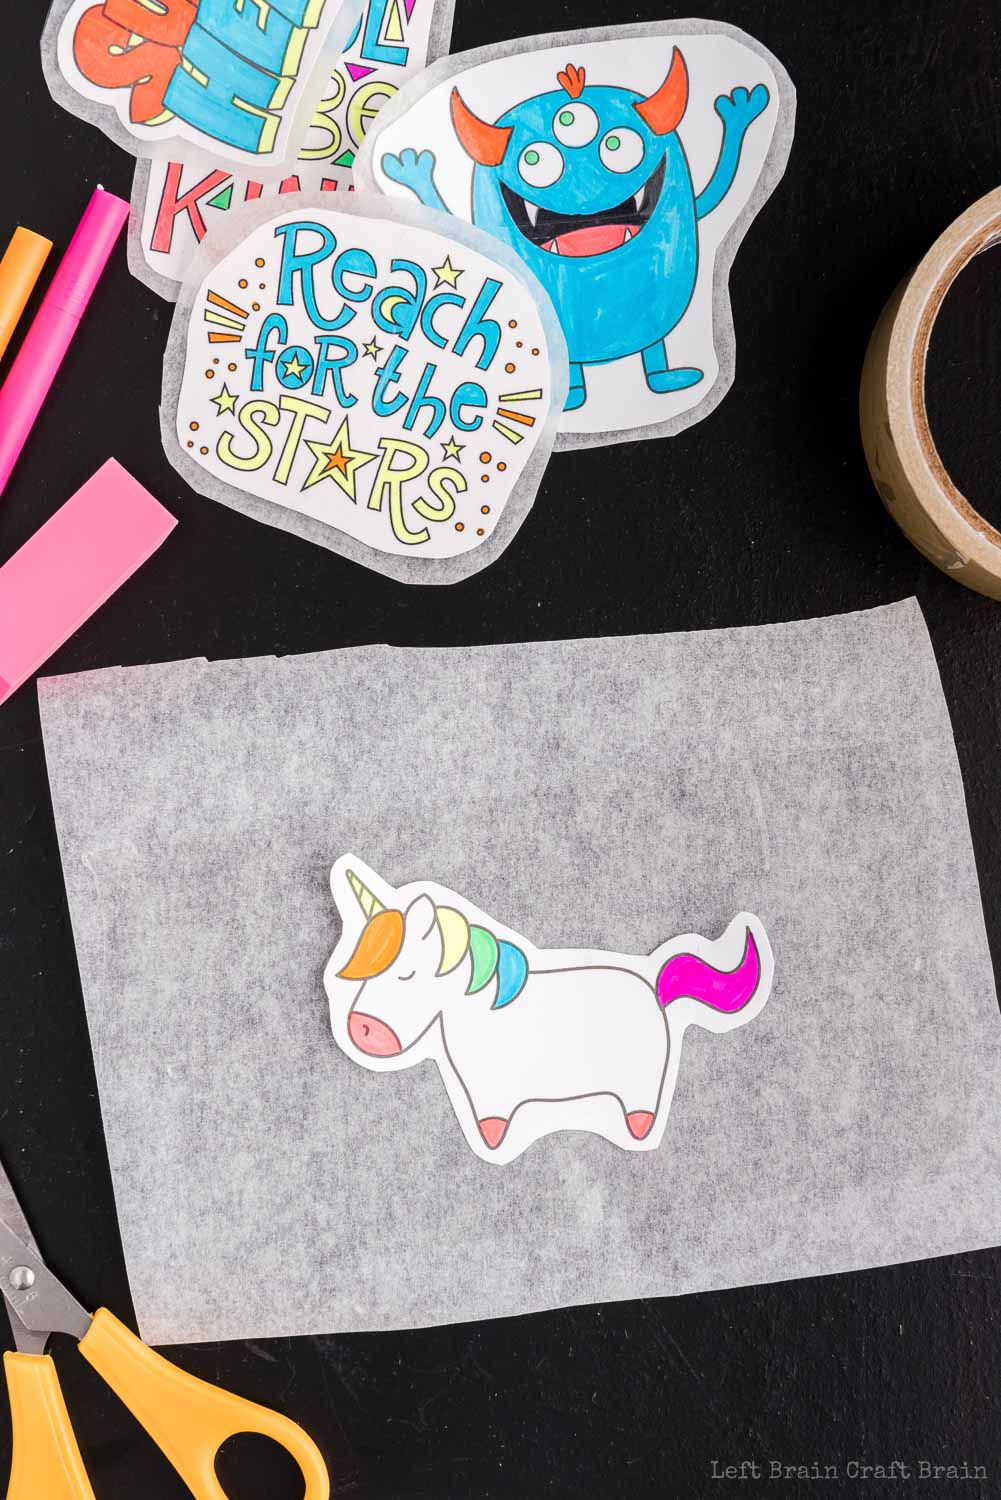 Lay design on tape - Make your own DIY stickers with a super easy process using basic supplies. Kids will love this activity. They're fun to add to presents, too.